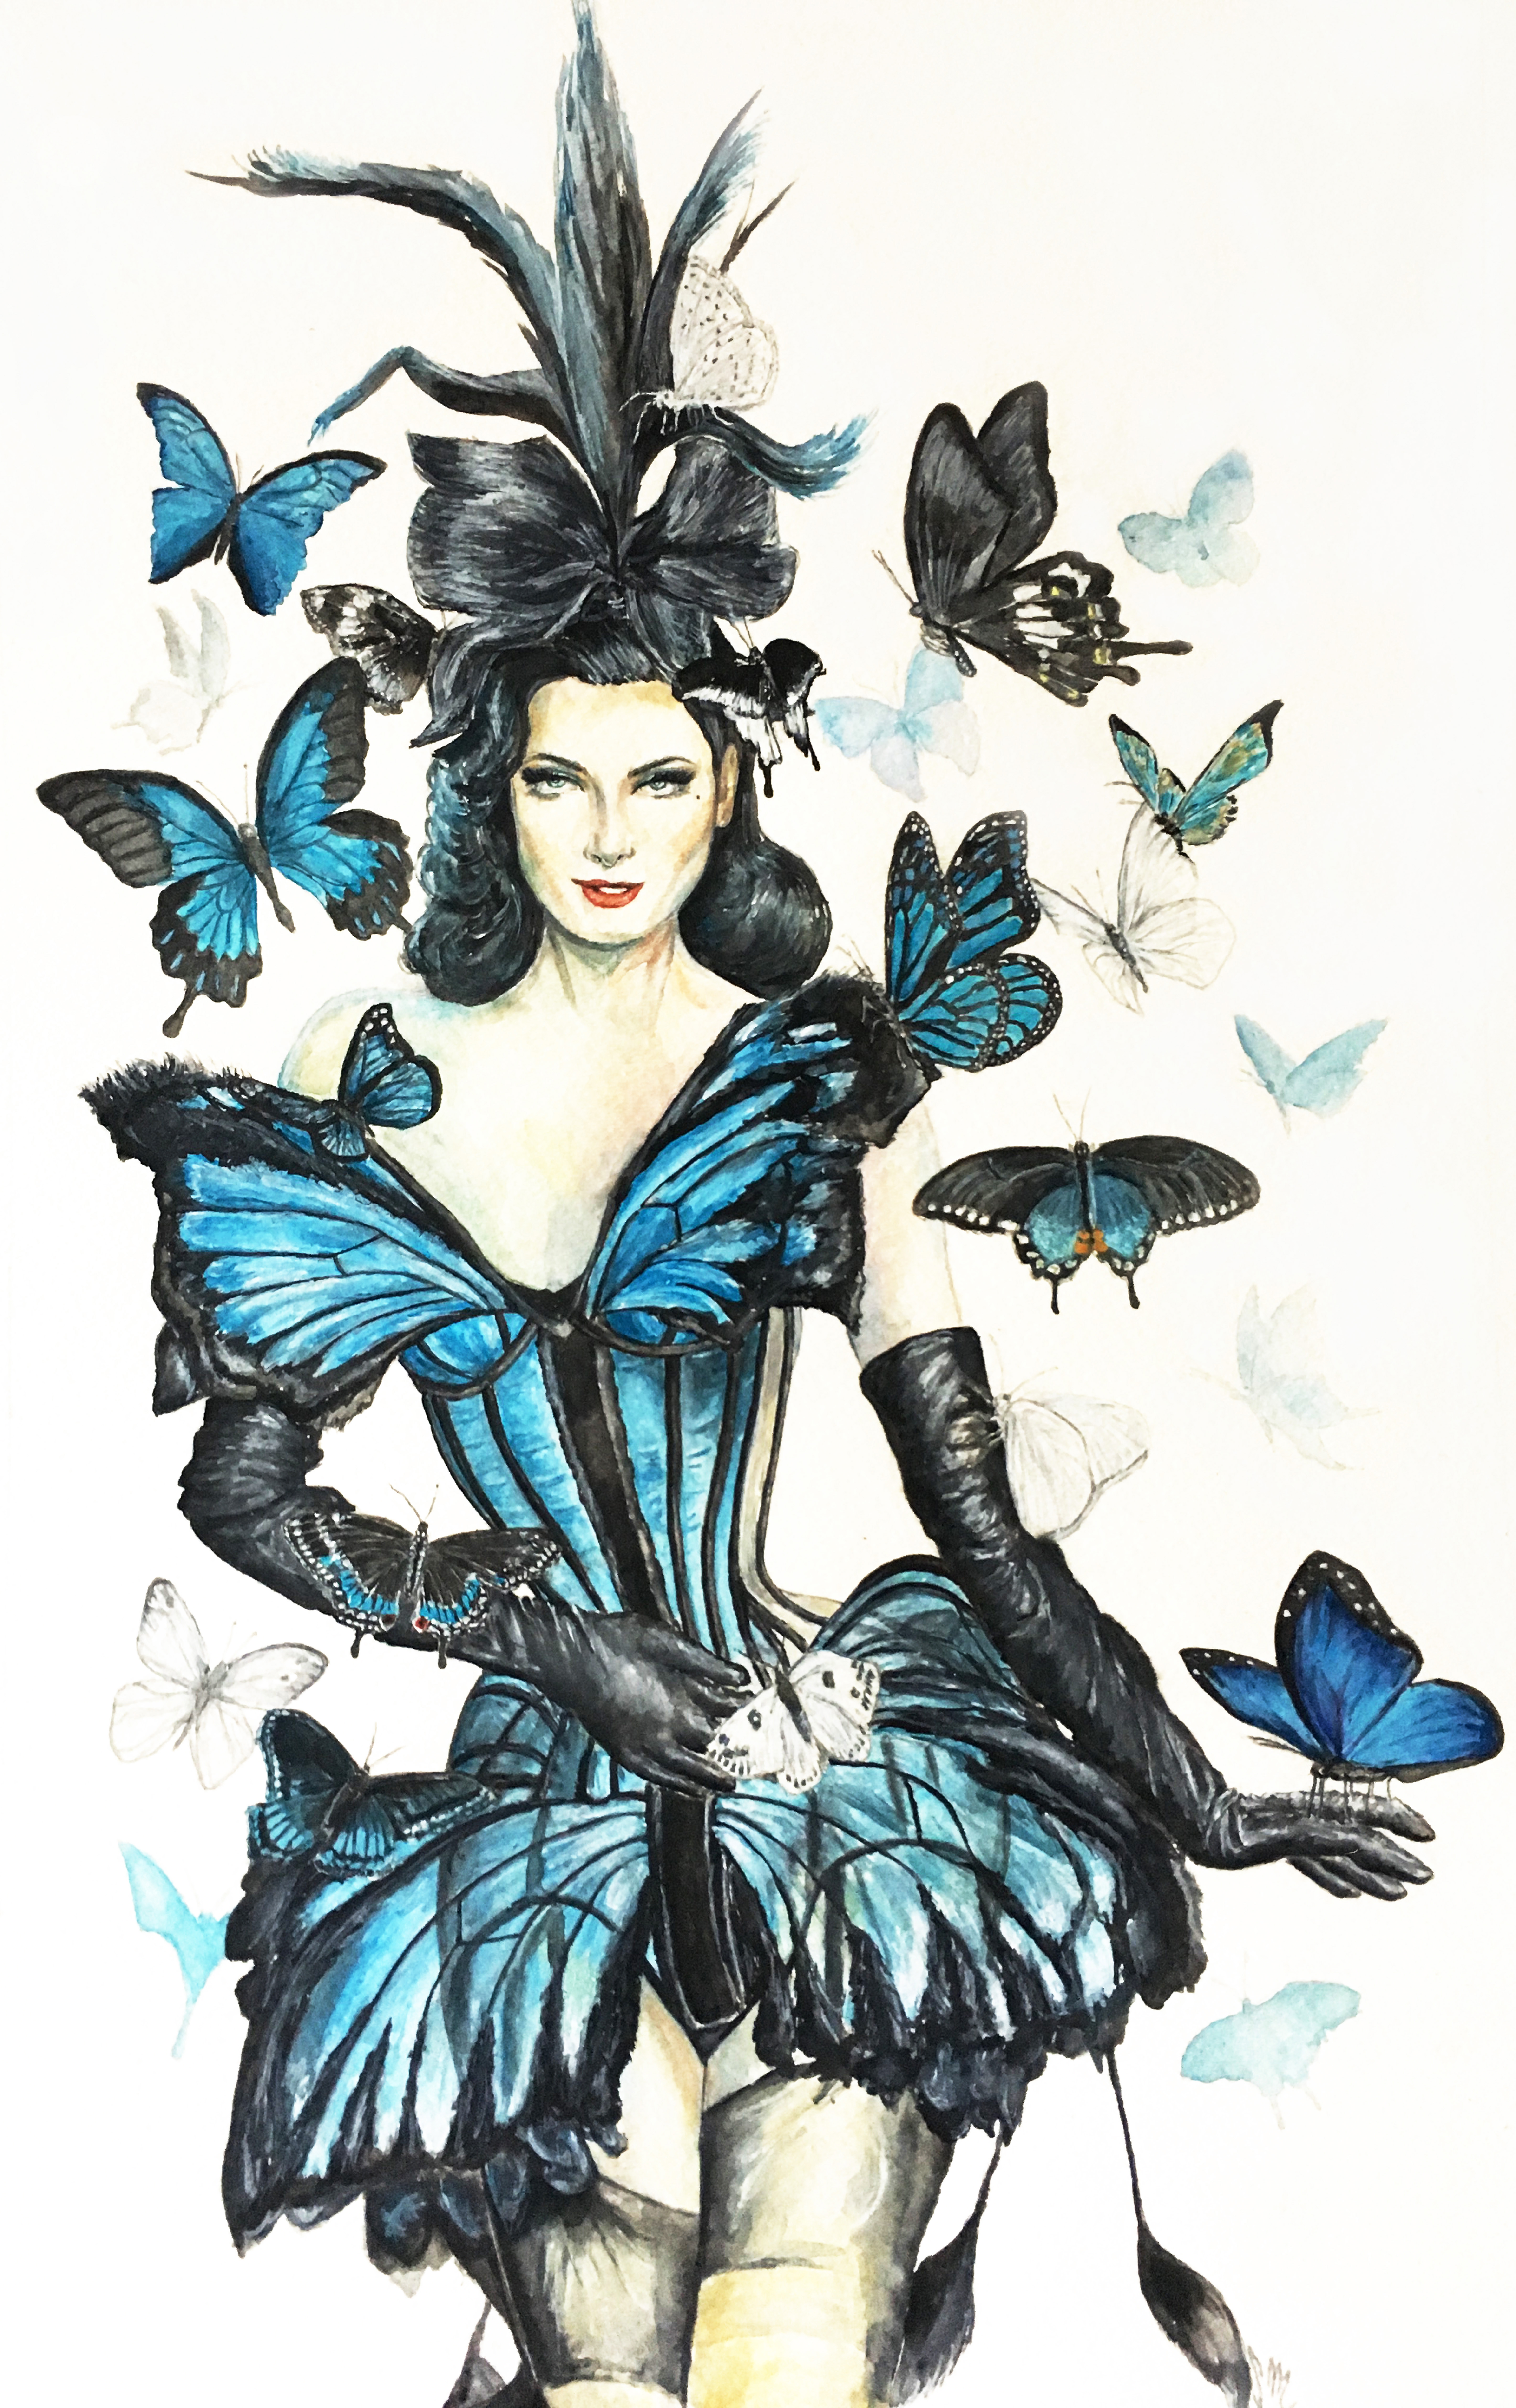 Madame Butterfly: Dita Von Teese Modeling Jean Paul Gaultier Butterfly Dress, Spring 2014 Couture